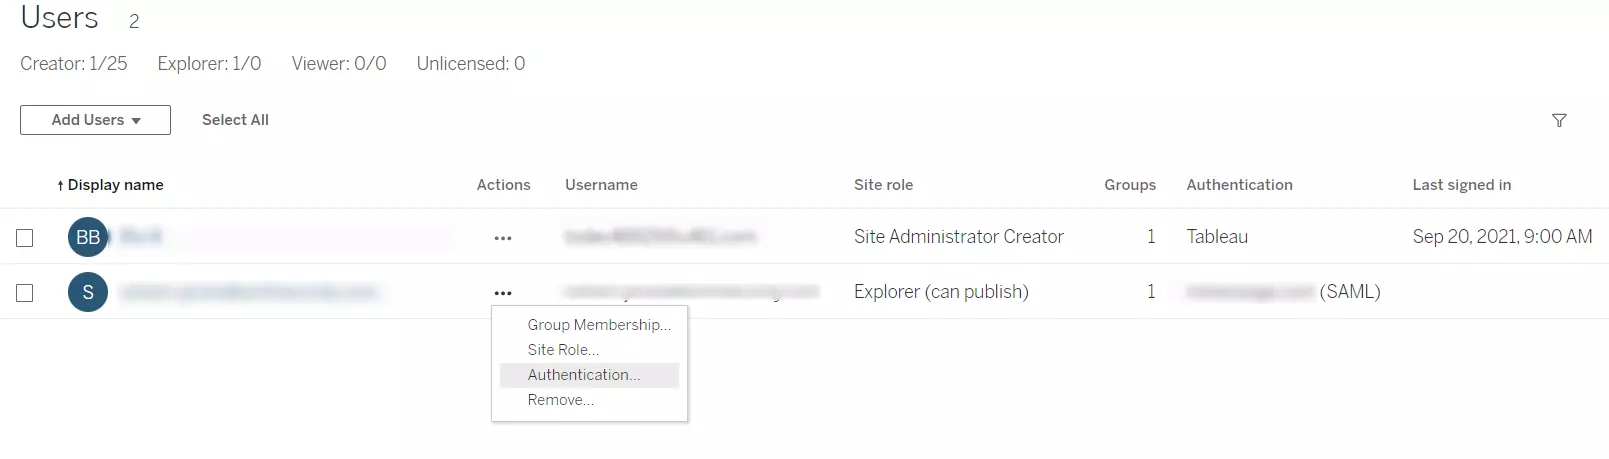 Manage Authentication - Tableau Online WP SSO | Tableau Online as SP for Login with WordPress (WP)